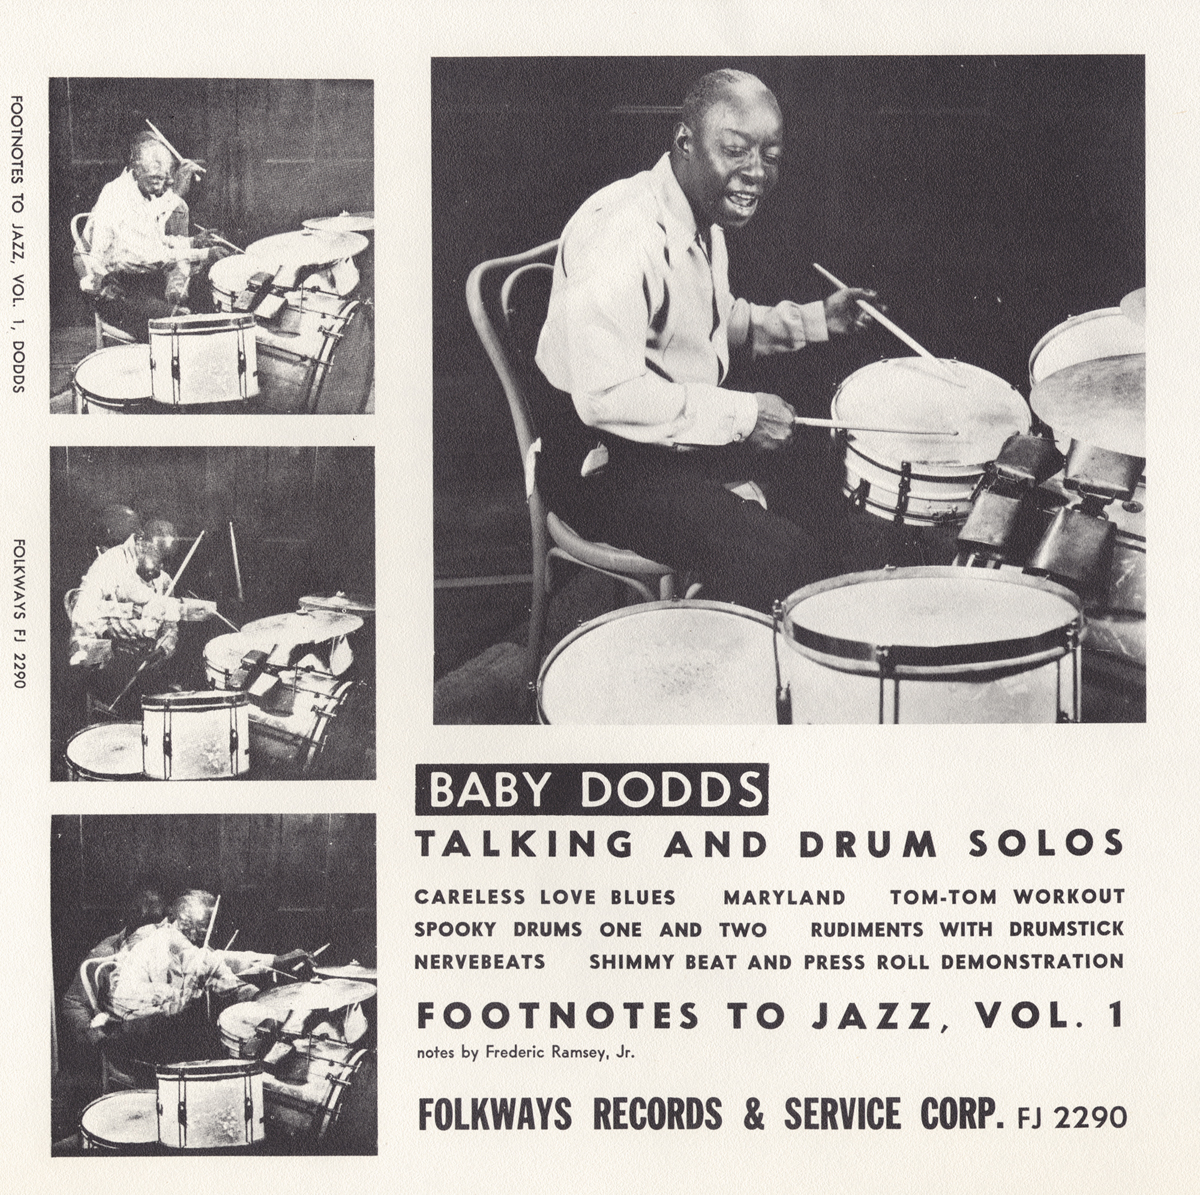 FOOTNOTES TO JAZZ, VOL. 1: BABY DODDS TALKING